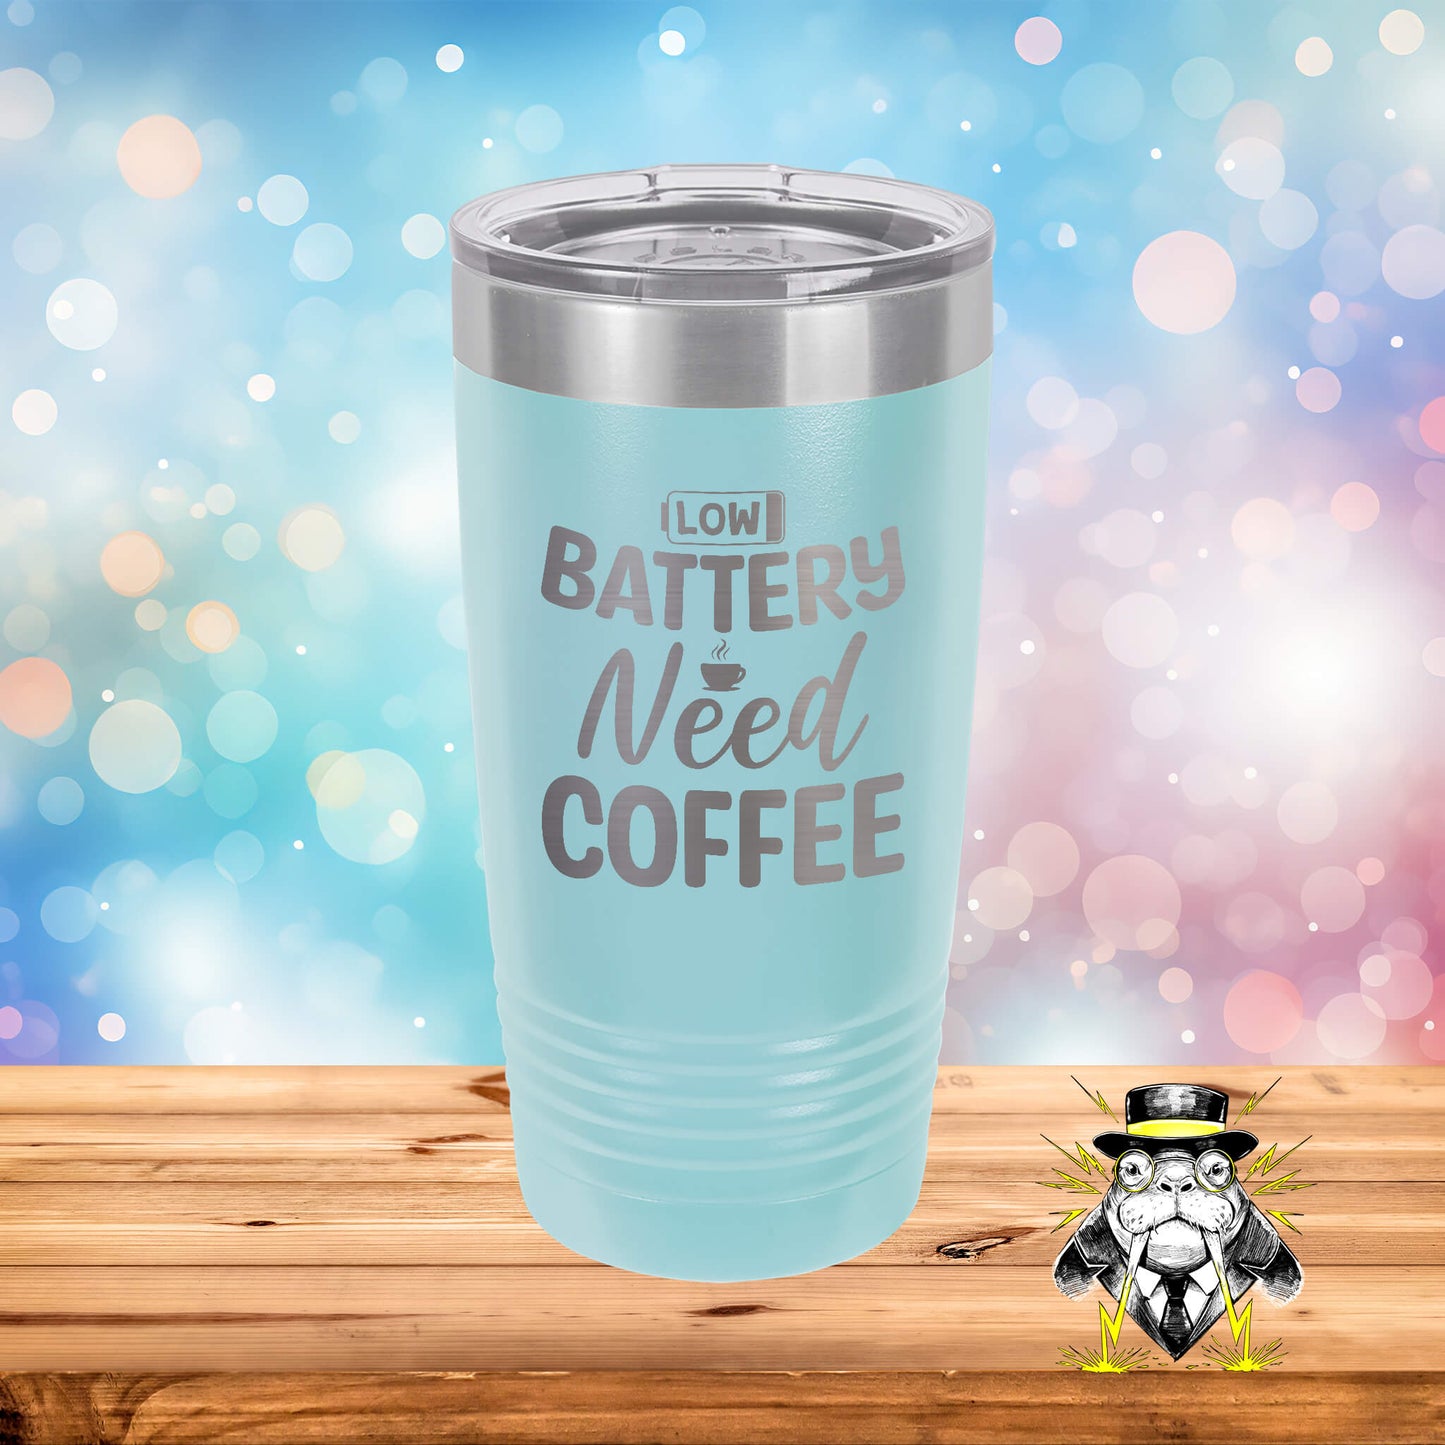 Low Battery, Need Coffee Engraved Tumbler